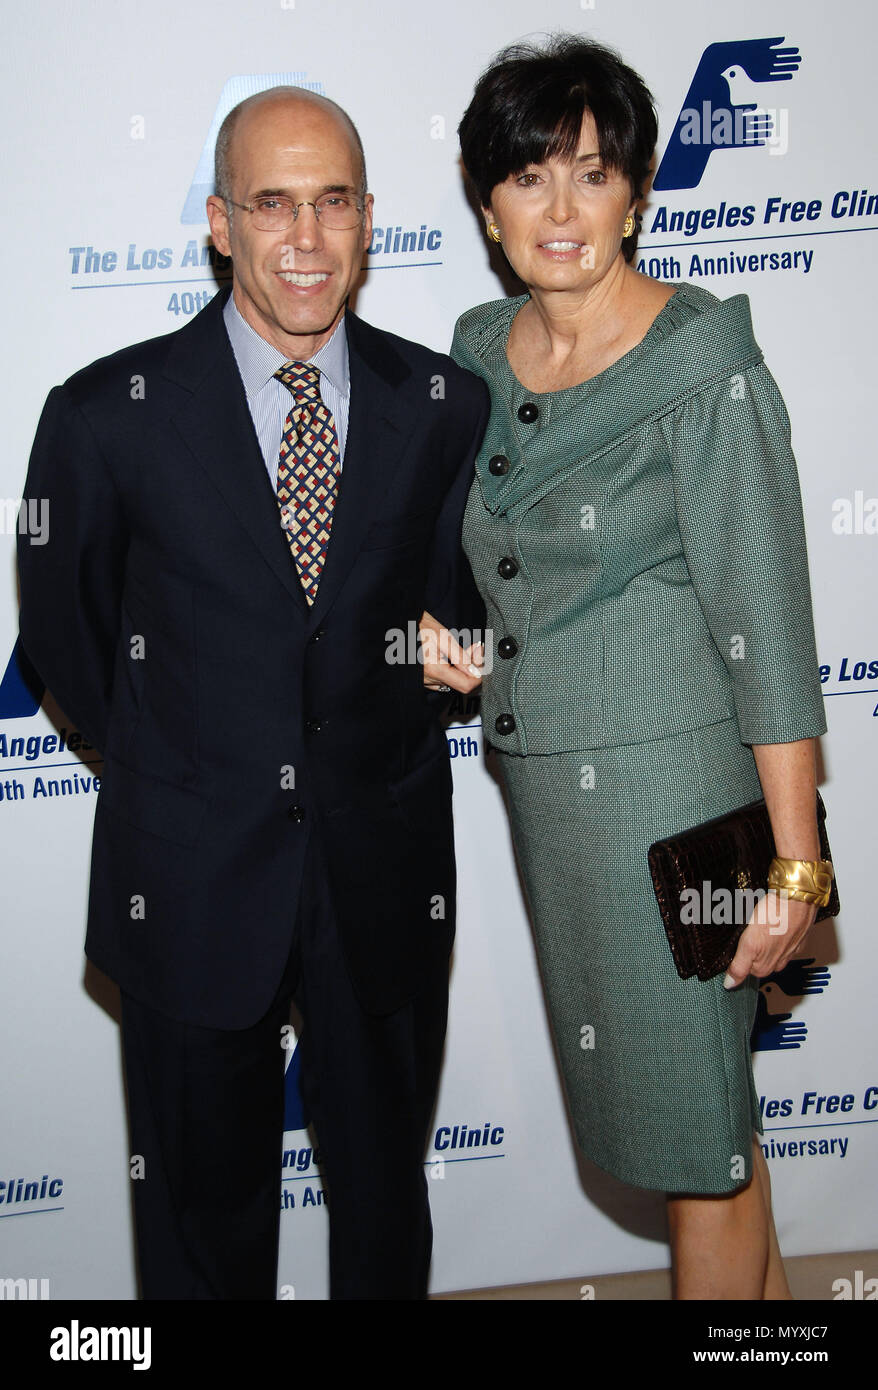 Jeffrey Katzenberg and wife arriving at Los Angeles Free Clinic Dinner Gala at the Beverly Hilton in Los Angeles.  3/4 eye contact KatzenbergJeffrey w 043  Event in Hollywood Life - California, Red Carpet Event, USA, Film Industry, Celebrities, Photography, Bestof, Arts Culture and Entertainment, Celebrities fashion, Best of, Hollywood Life, Event in Hollywood Life - California, Red Carpet and backstage, Music celebrities, Topix, Couple, family ( husband and wife ) and kids- Children, brothers and sisters inquiry tsuni@Gamma-USA.com, Credit Tsuni / USA, 2006 to 2009 Stock Photo